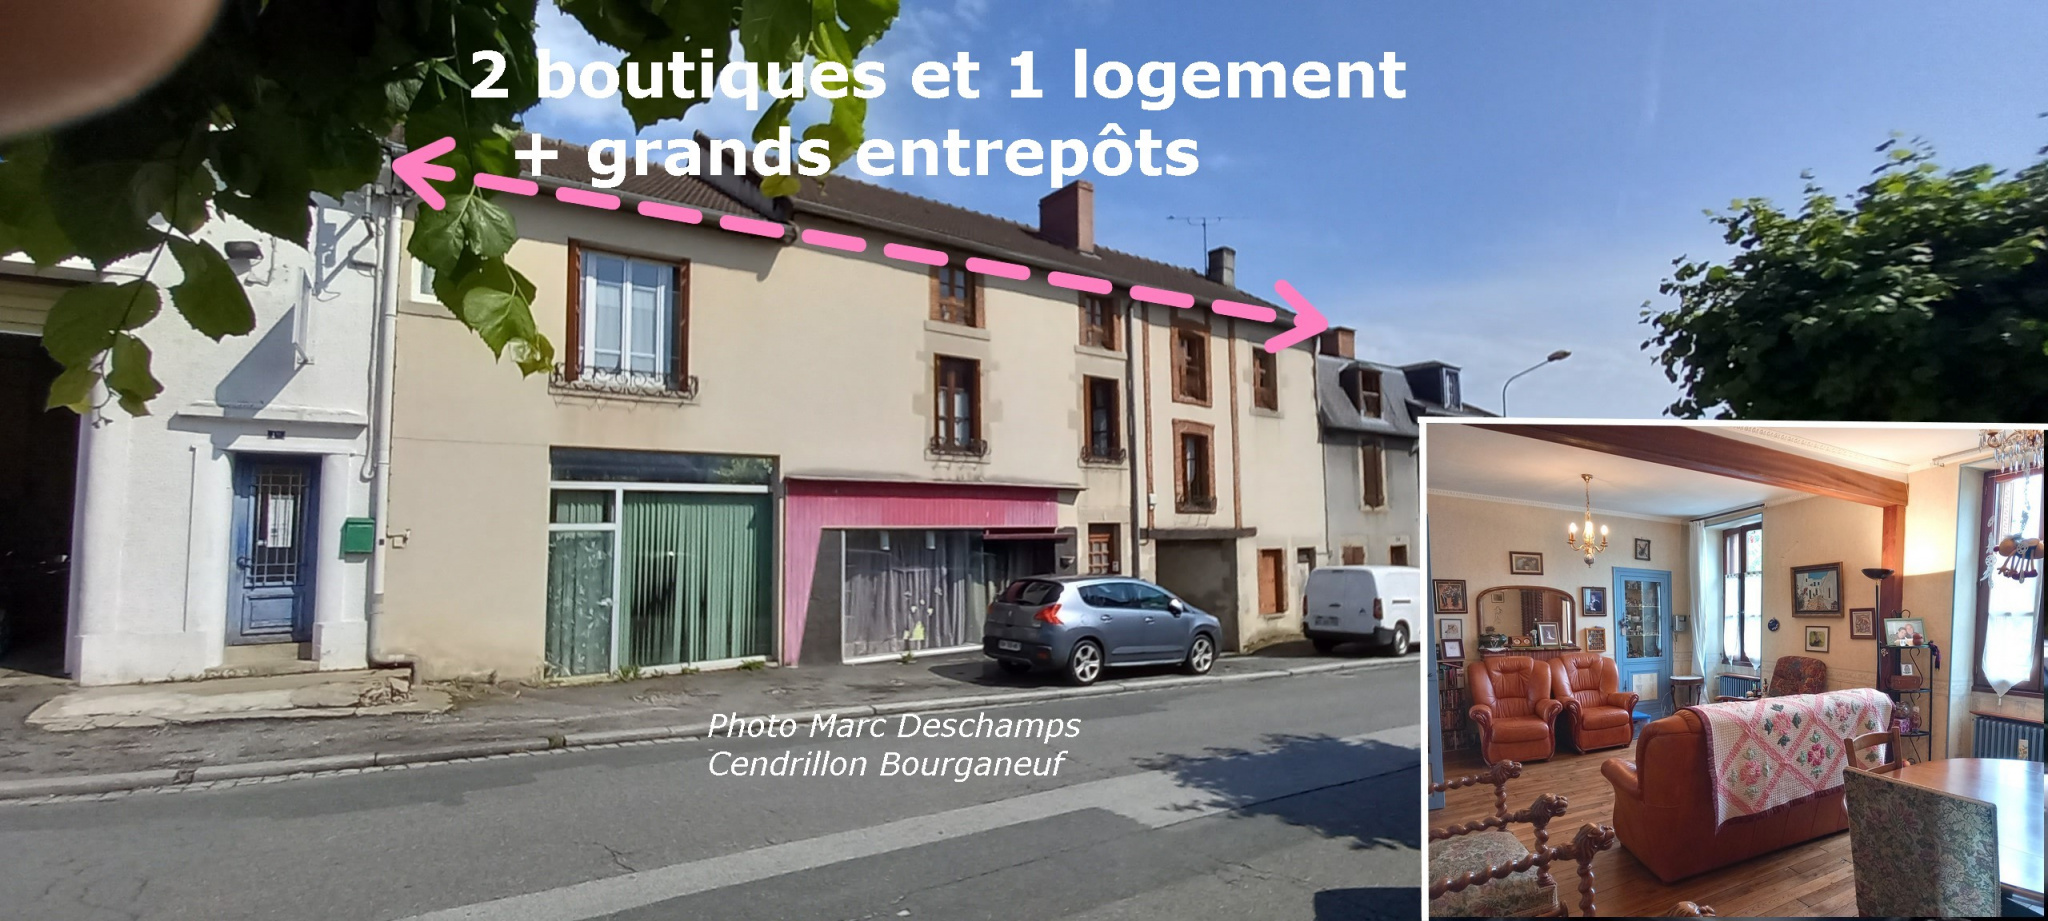 Appartement 12 pièces - 300m² - BOURGANEUF